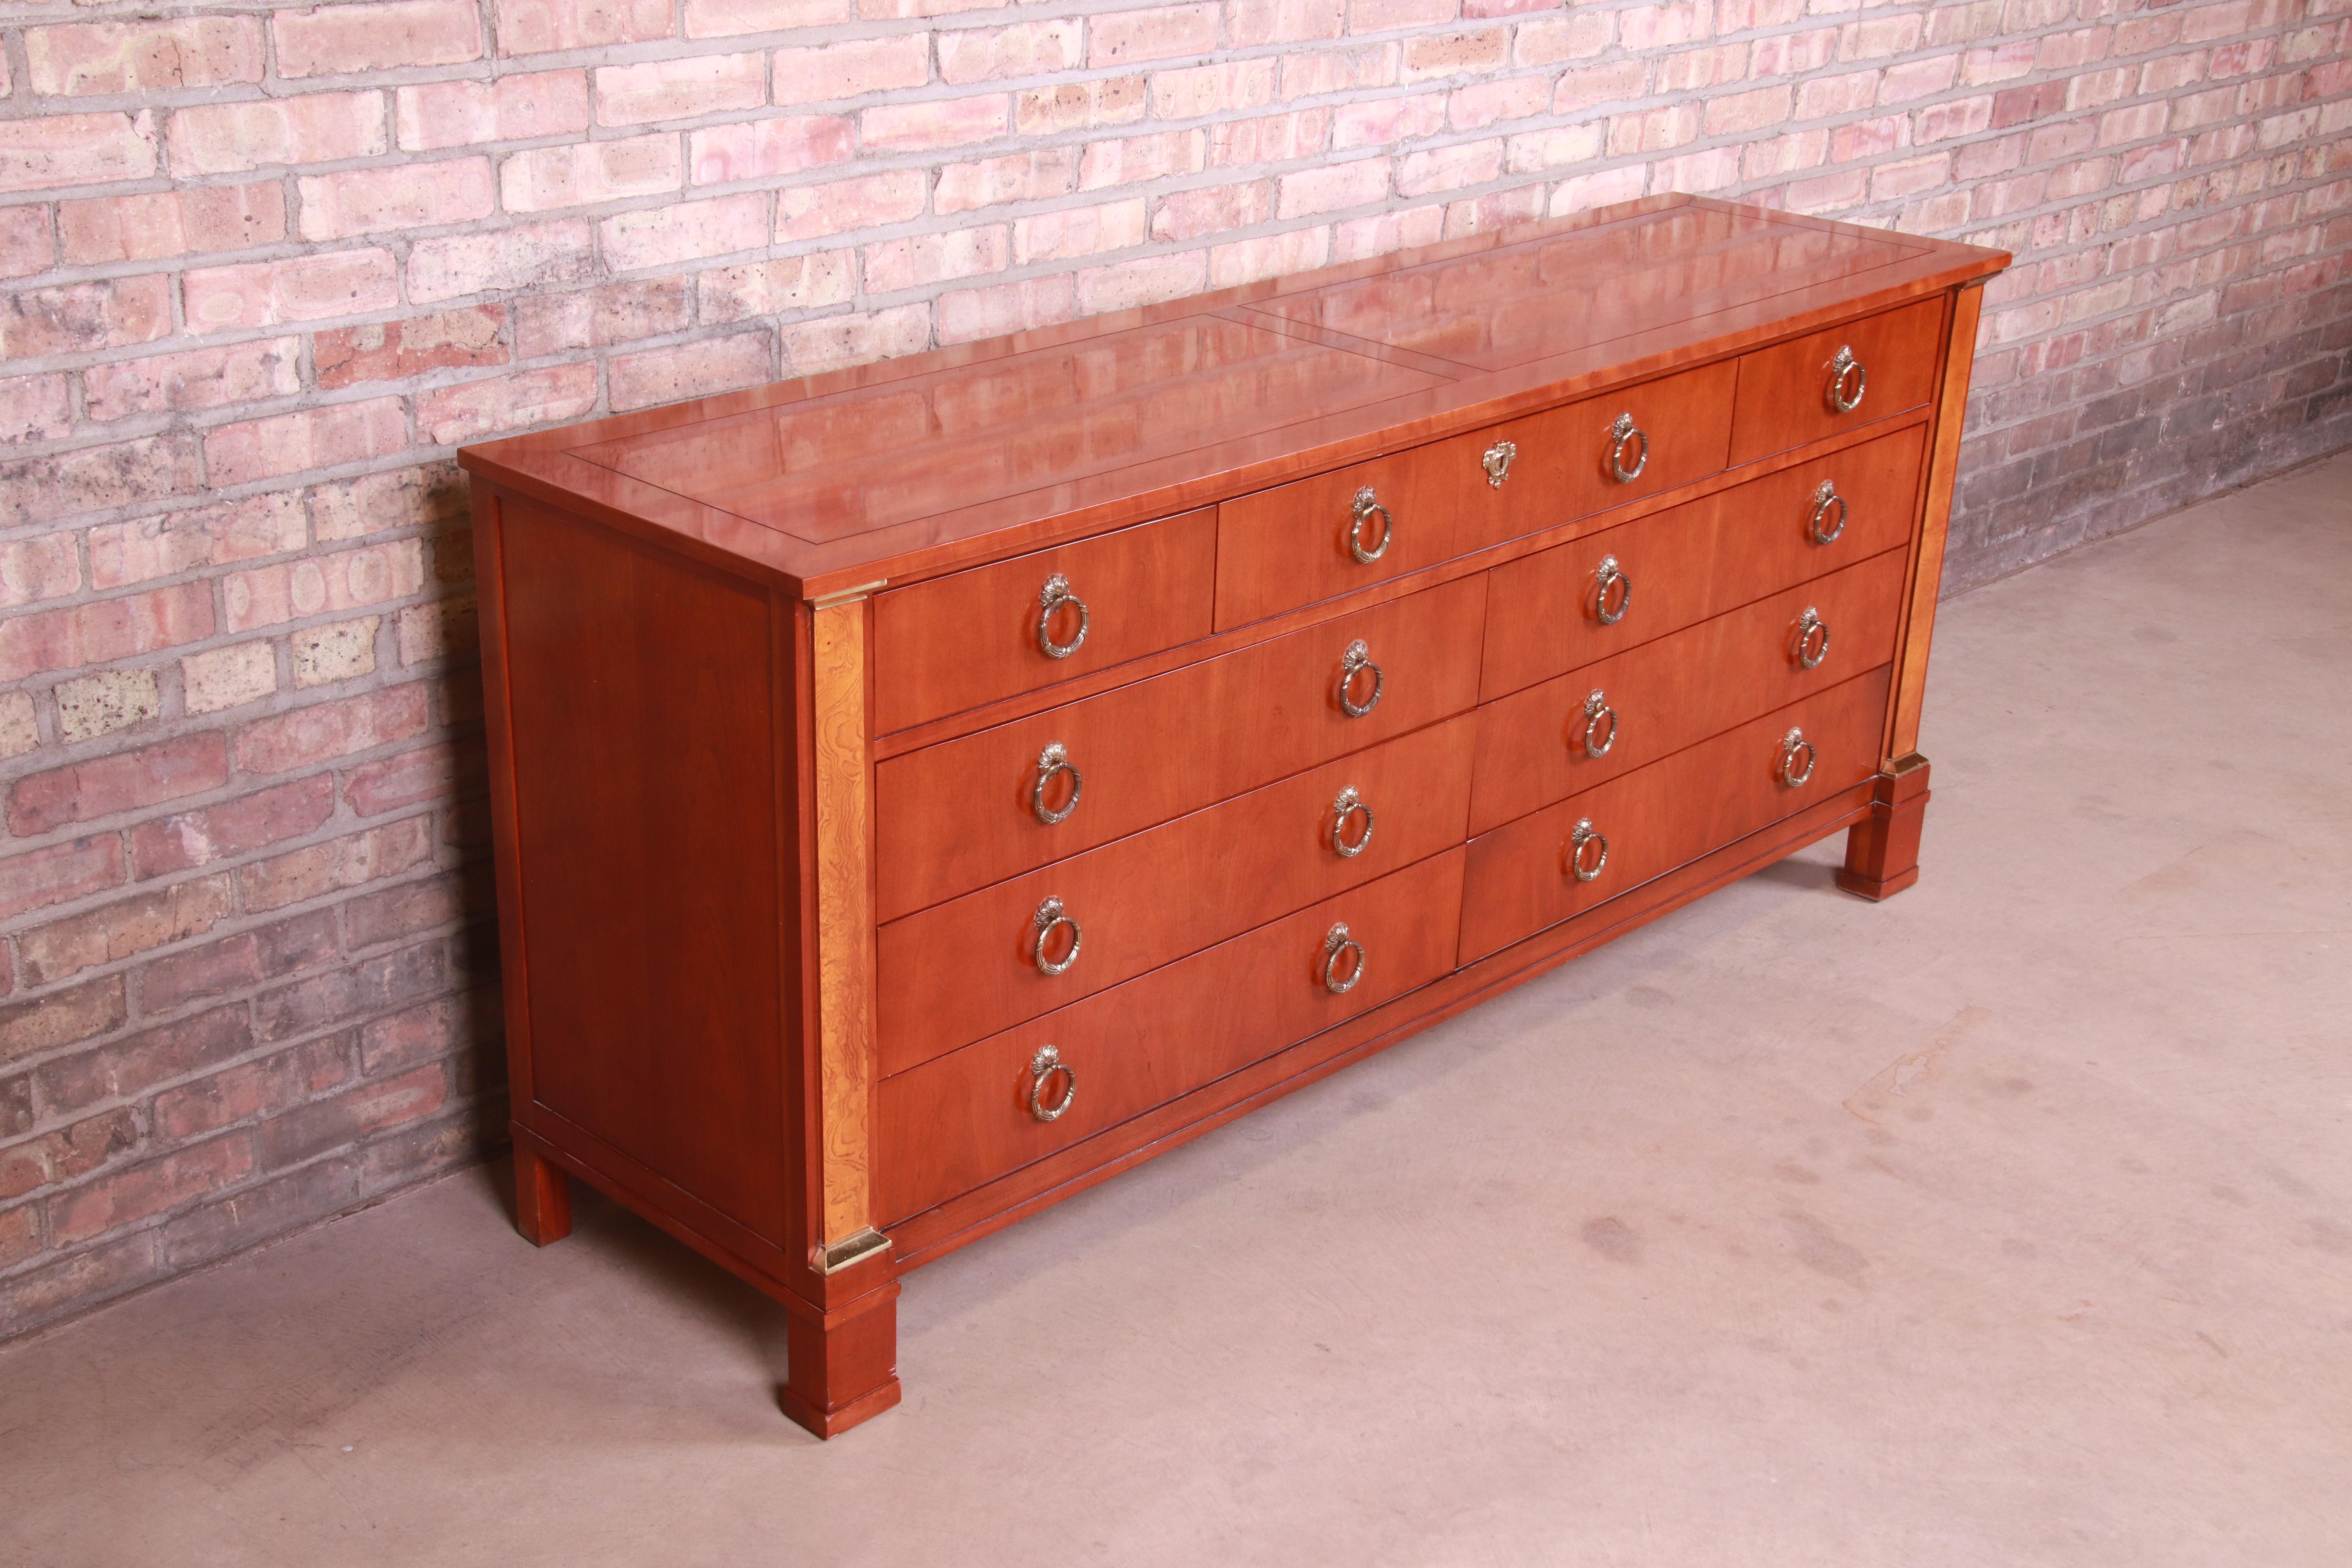 20th Century Baker Furniture Neoclassical Cherry and Burl Wood Dresser or Credenza